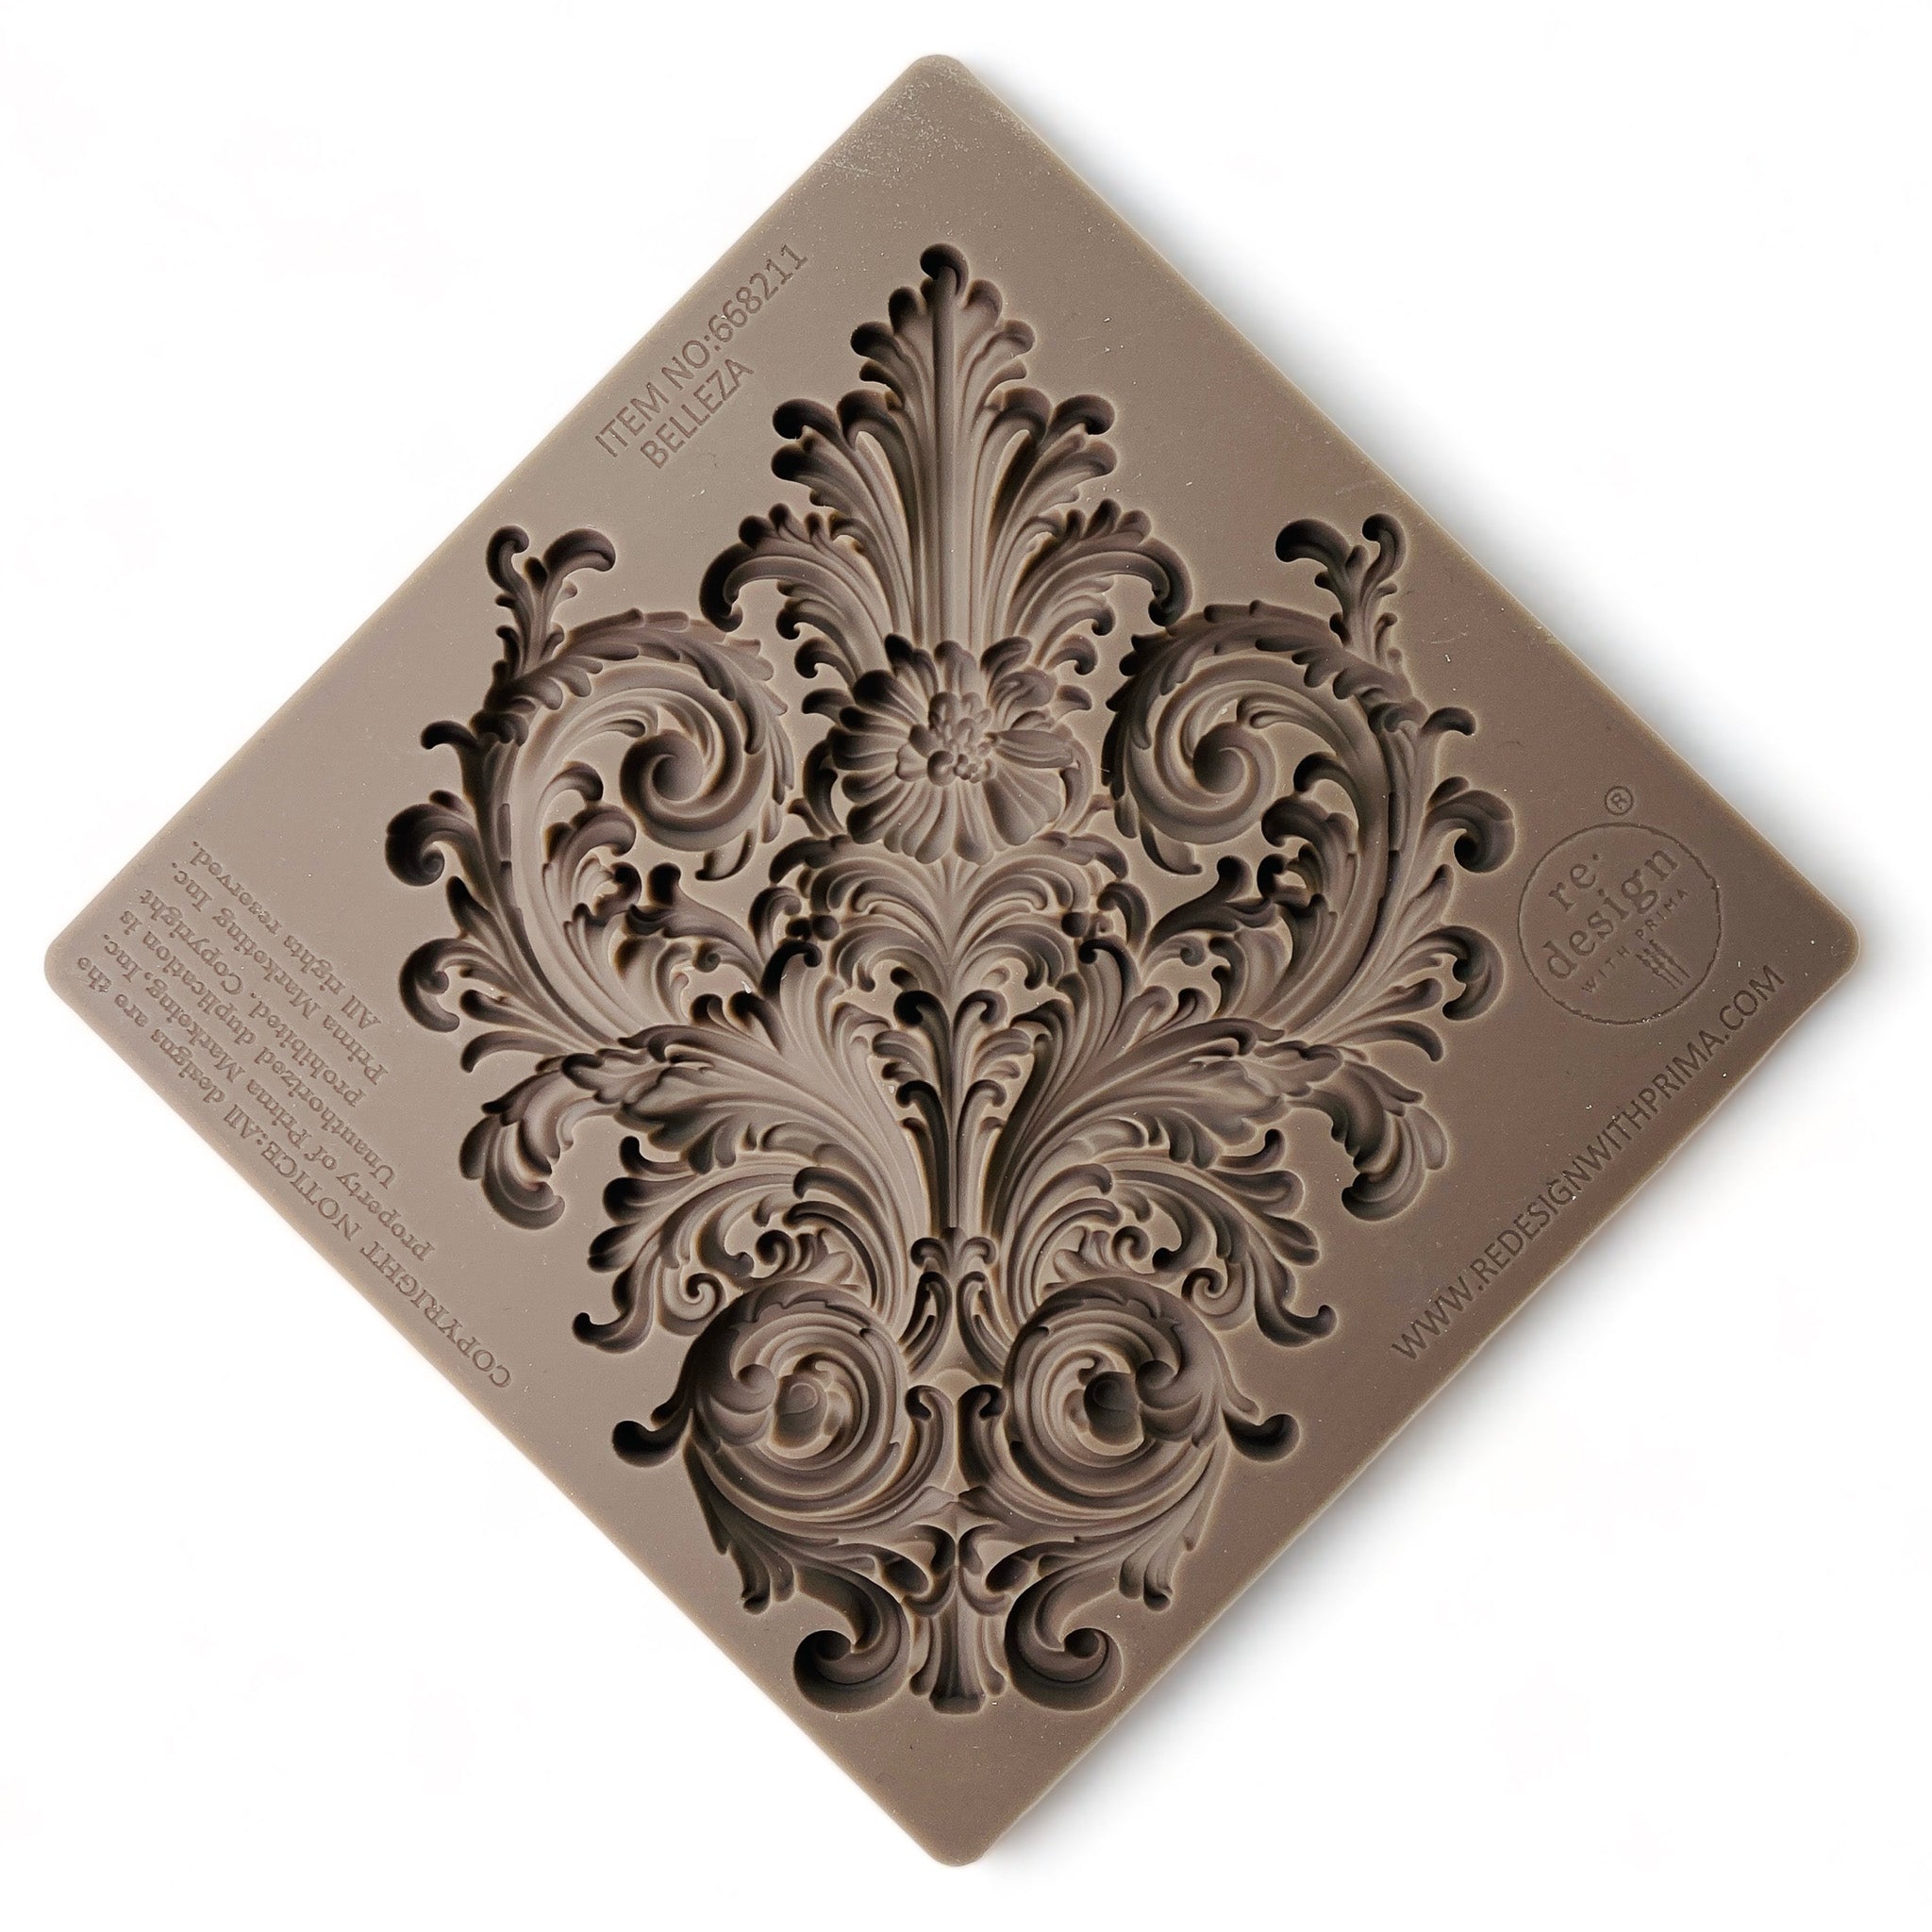 A brown silicone mold of an ornate leaf scroll design is against a white background.